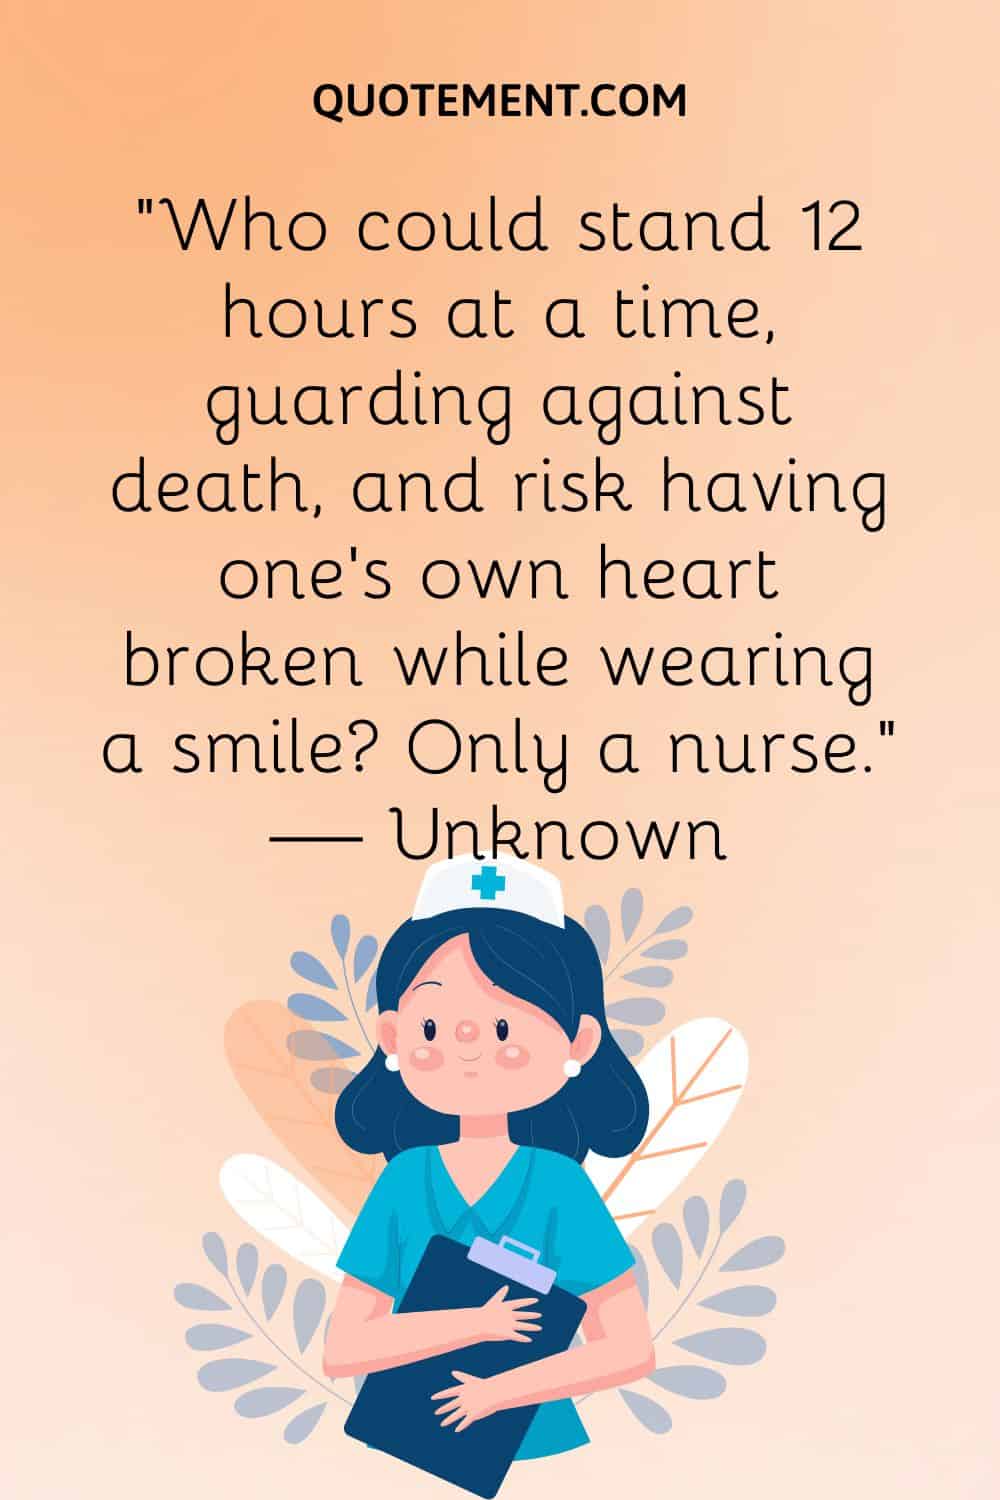 “Who could stand 12 hours at a time, guarding against death, and risk having one’s own heart broken while wearing a smile Only a nurse.” — Unknown